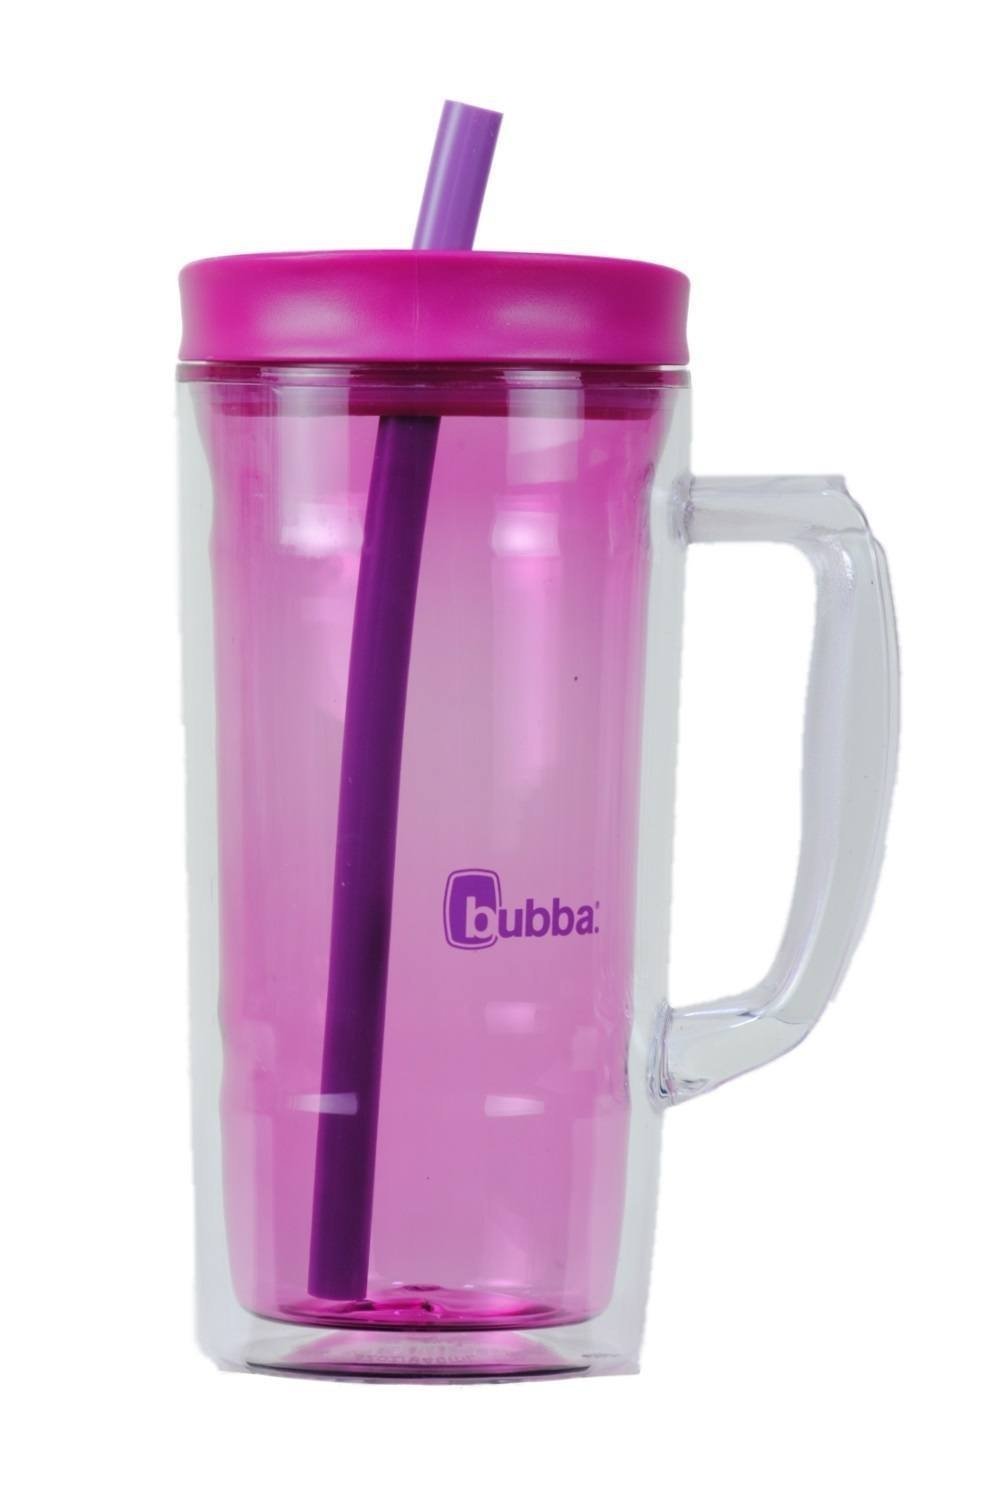 1pc Insulated Cup/bubba Cup Large Capacity Water Cup With Straw